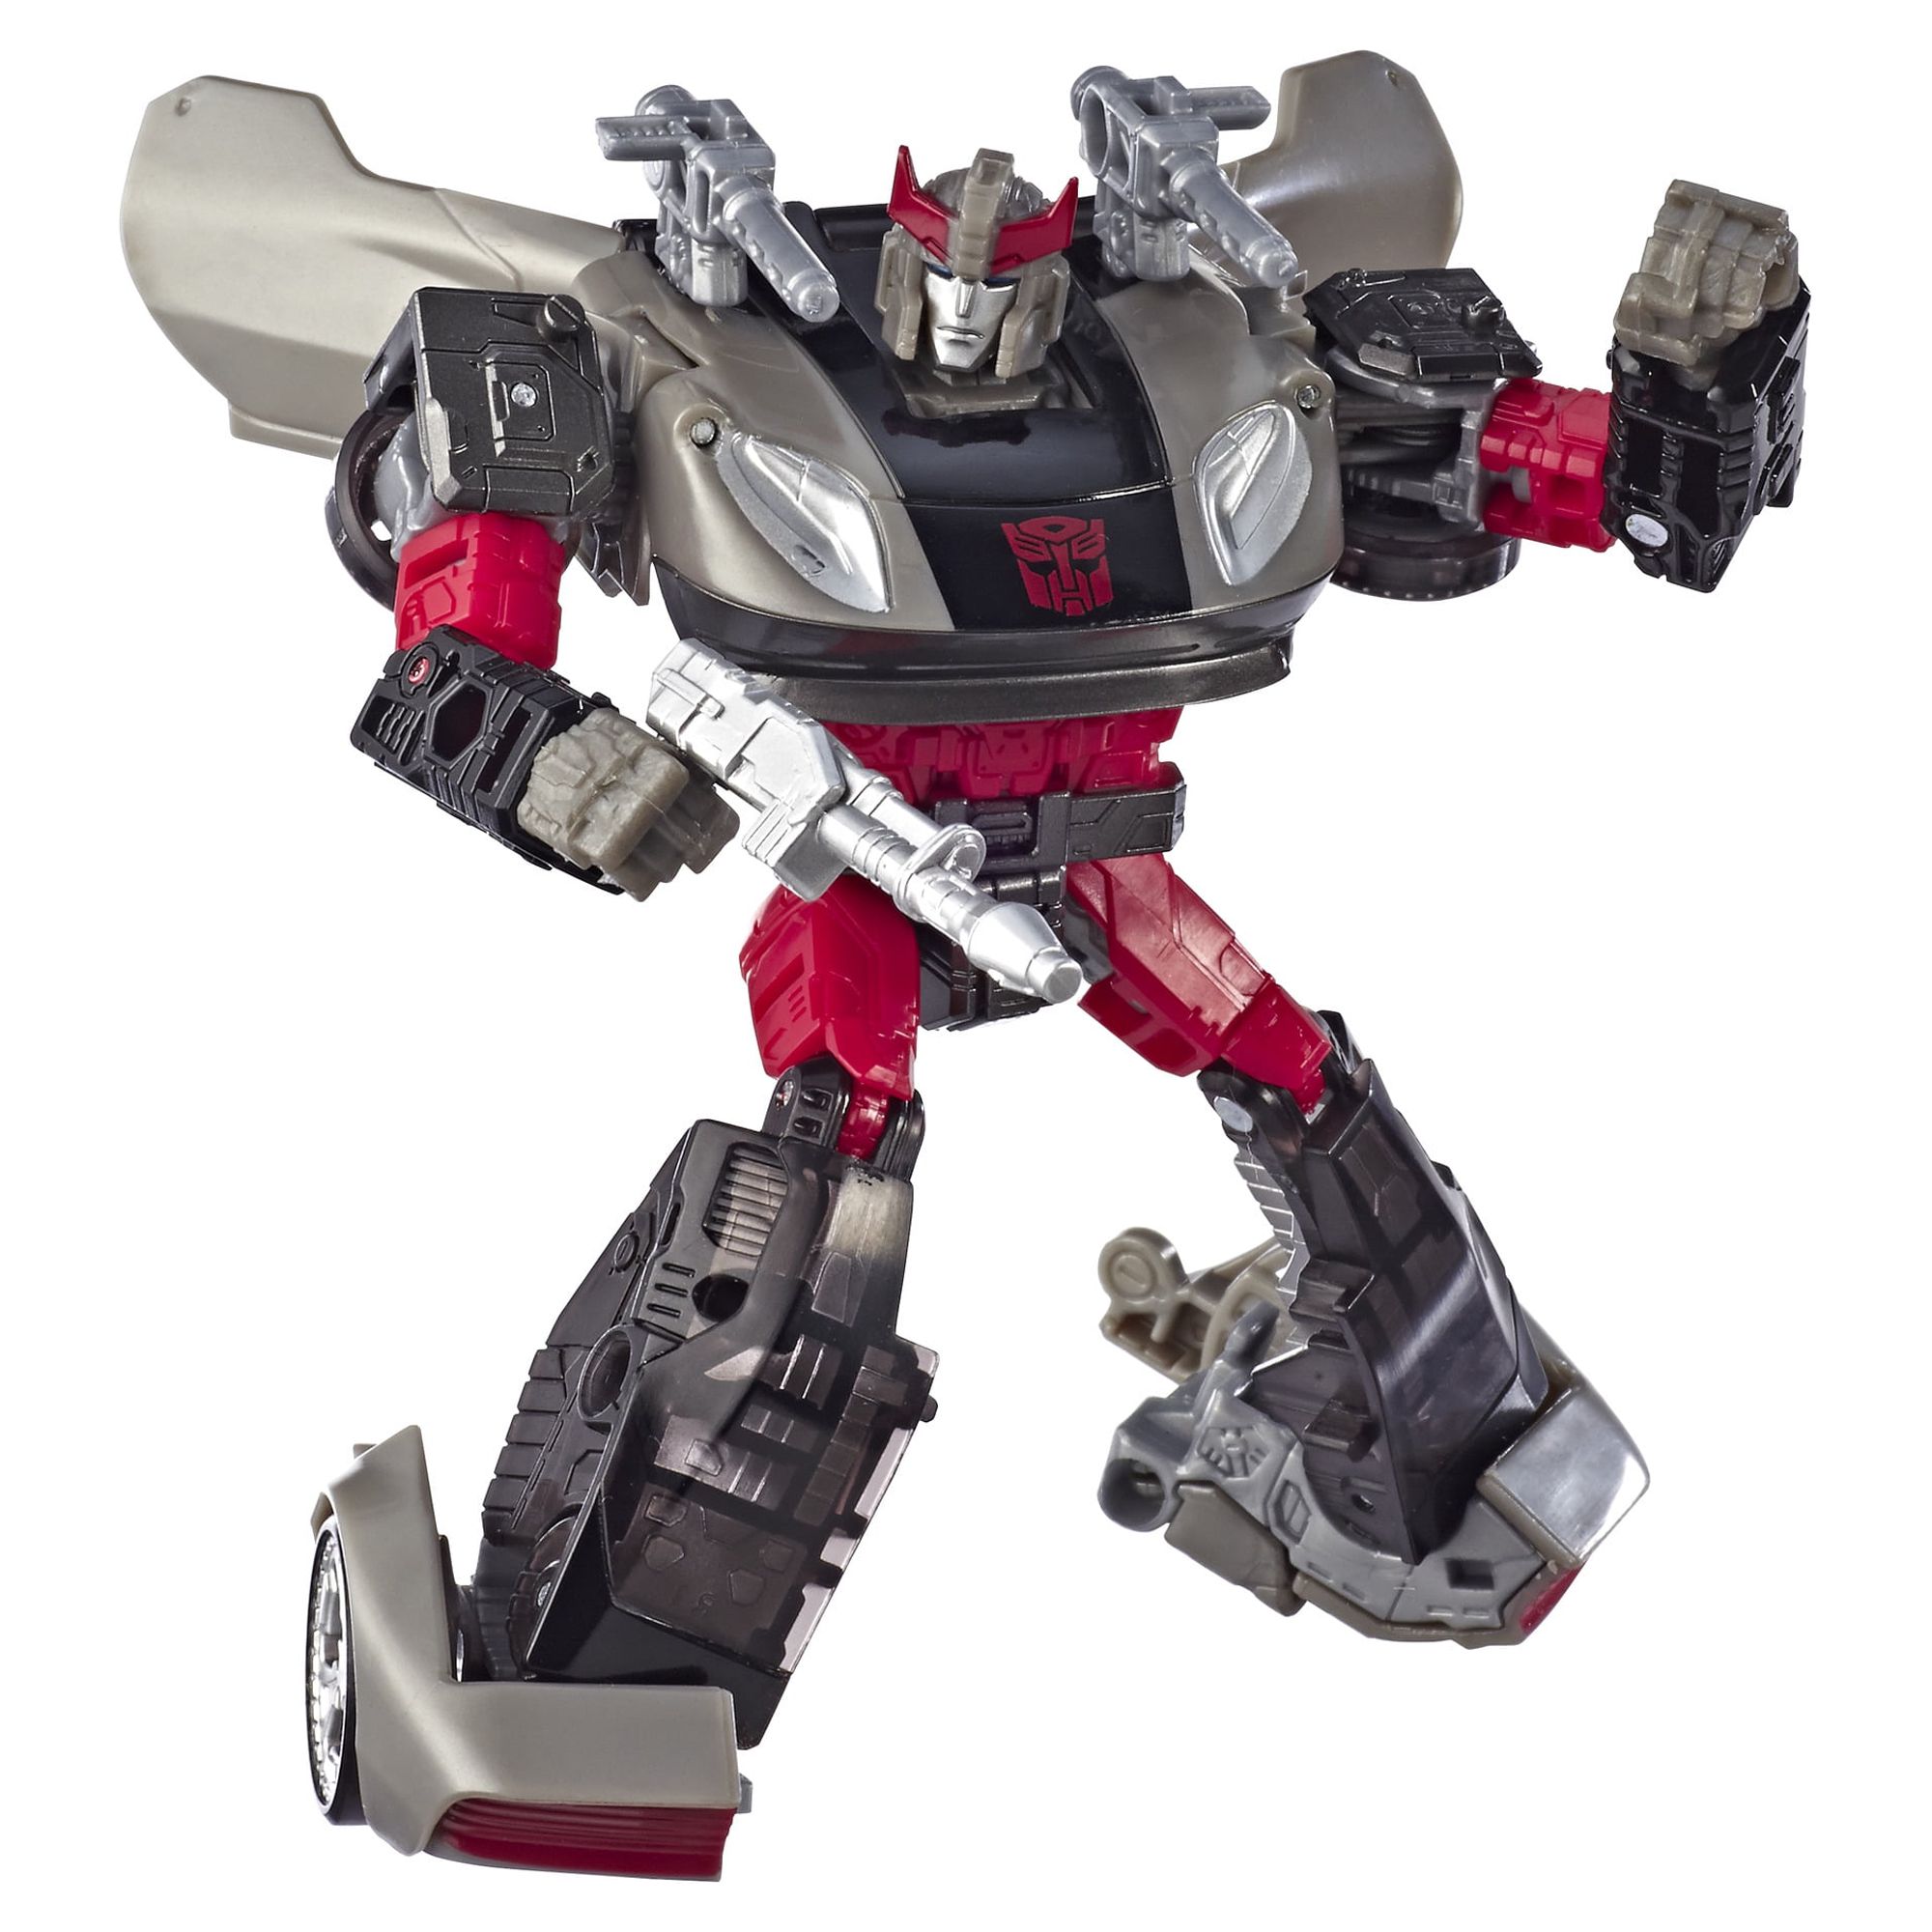 Transformers: Siege War for Cybertron Bluestreak Kids Toy Action Figure for Boys and Girls (4”) - image 1 of 10